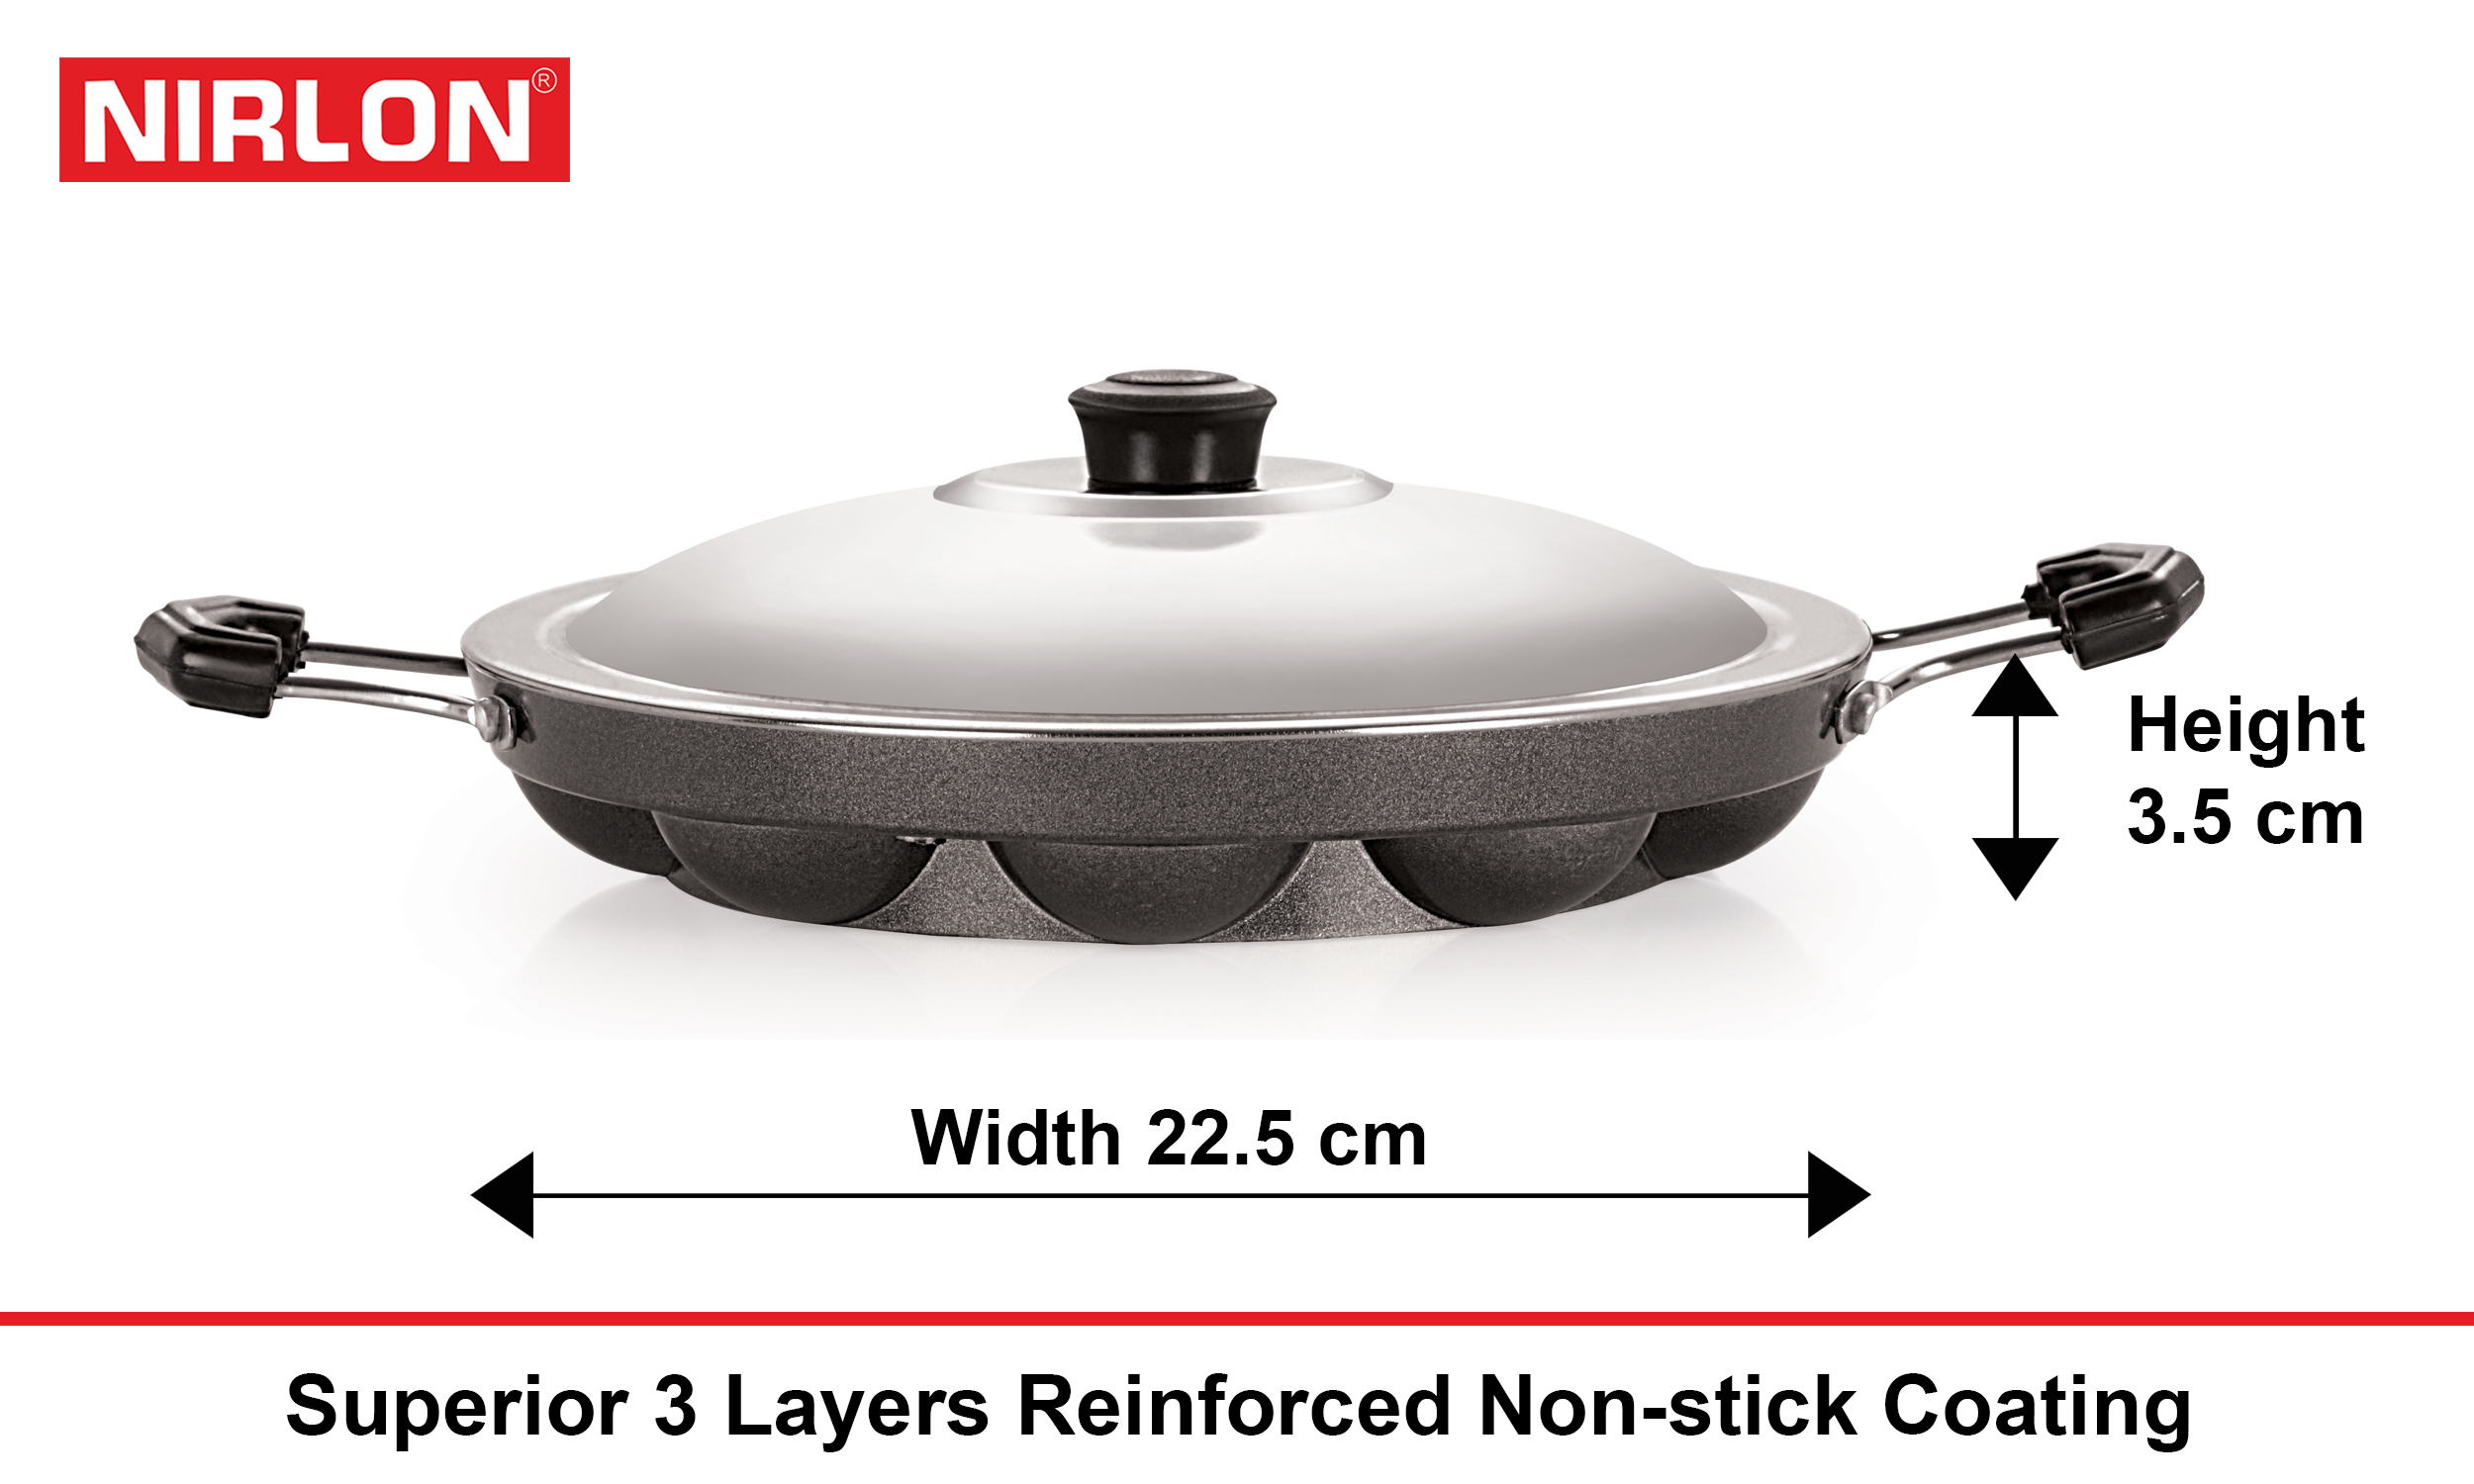 12 Cavity Nirlon Appam Patra with Stainless Steel Lid